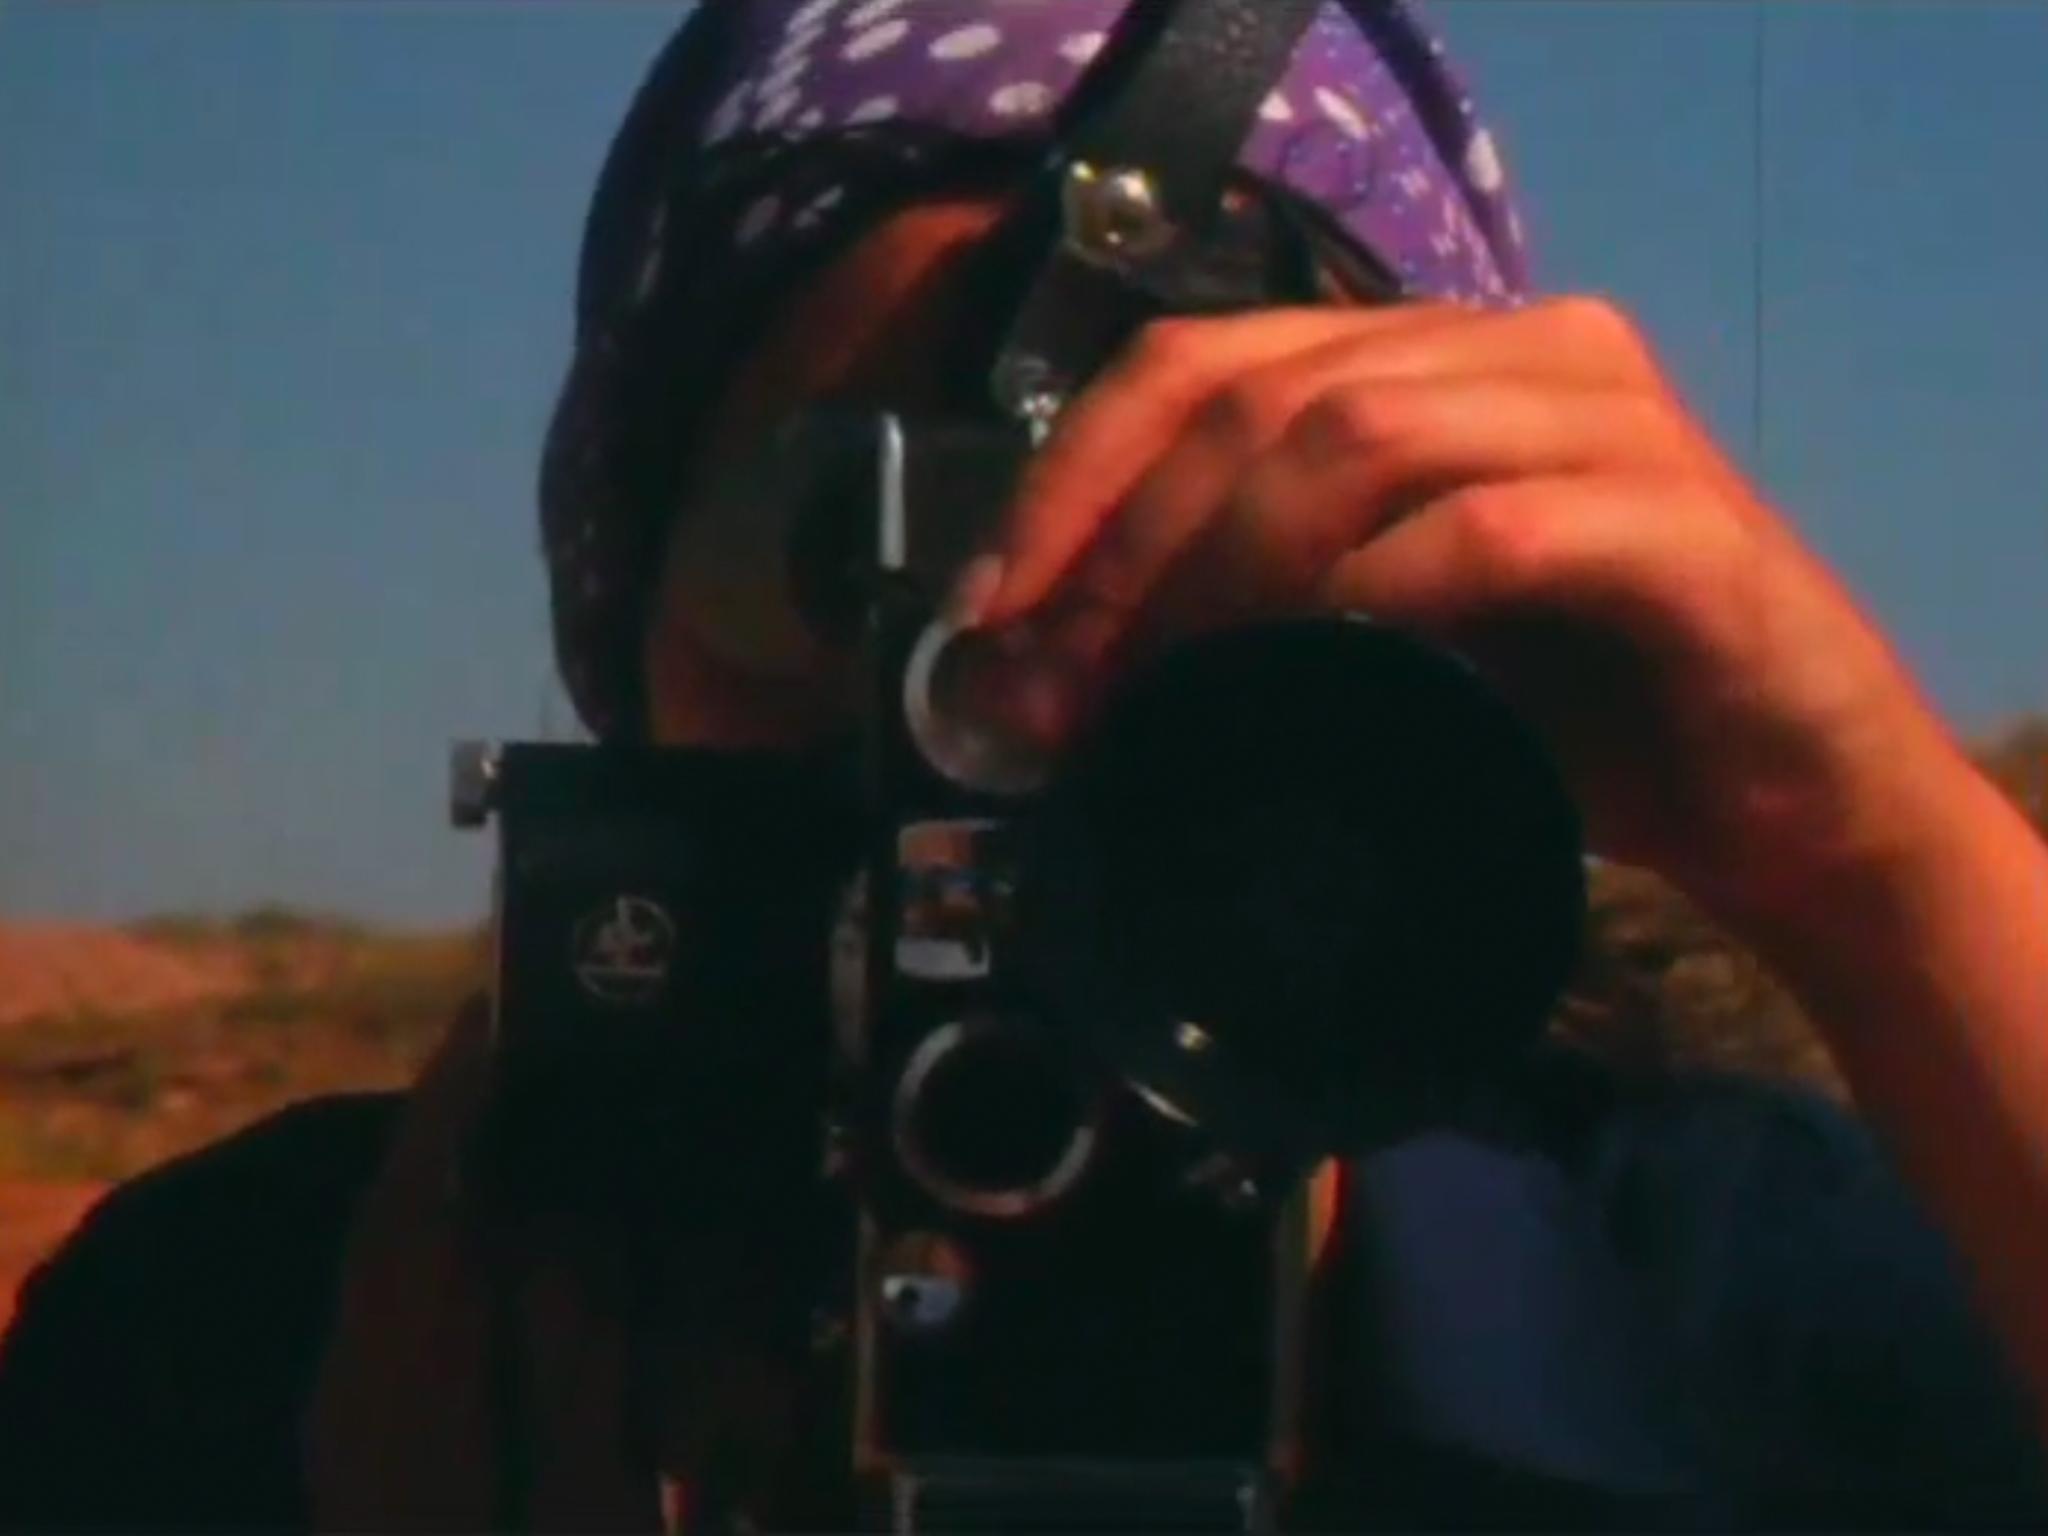 a close-up image of a person adjusting the focus on a film camera, which is pointed at the viewer.